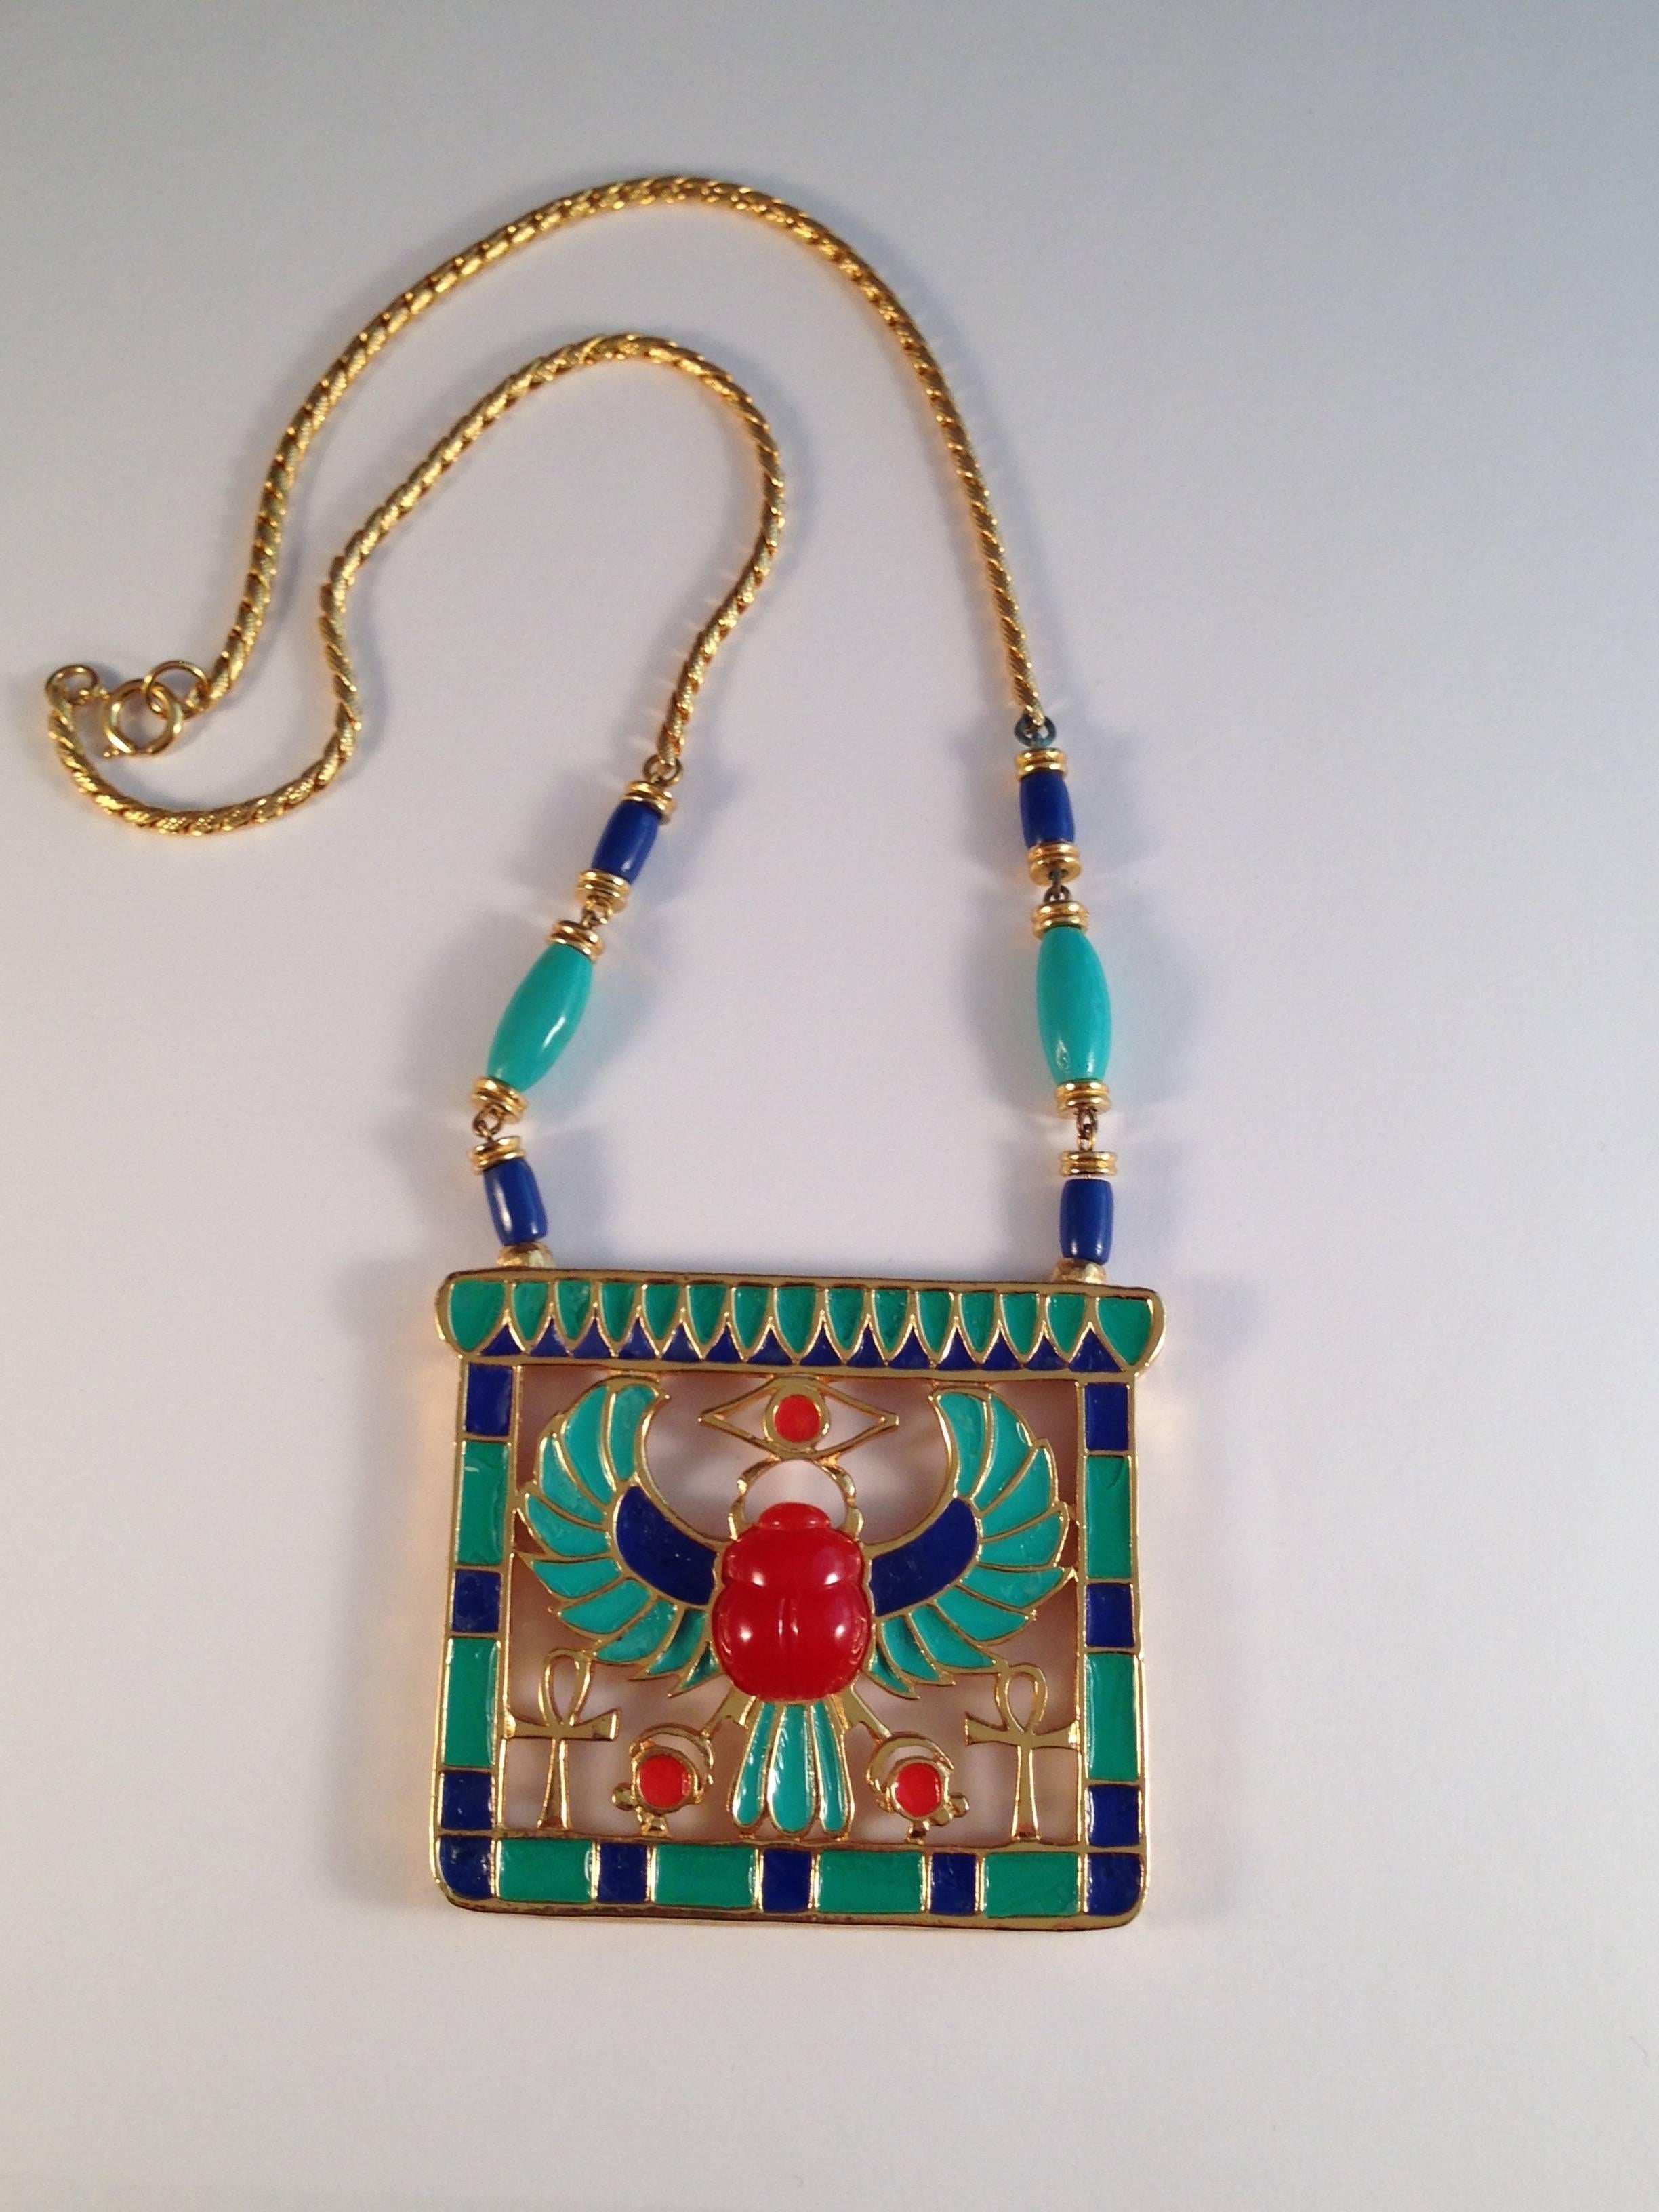 Hattie Carnegie Necklace 1960s Egyptian Revival Pendant In Excellent Condition For Sale In Chicago, IL